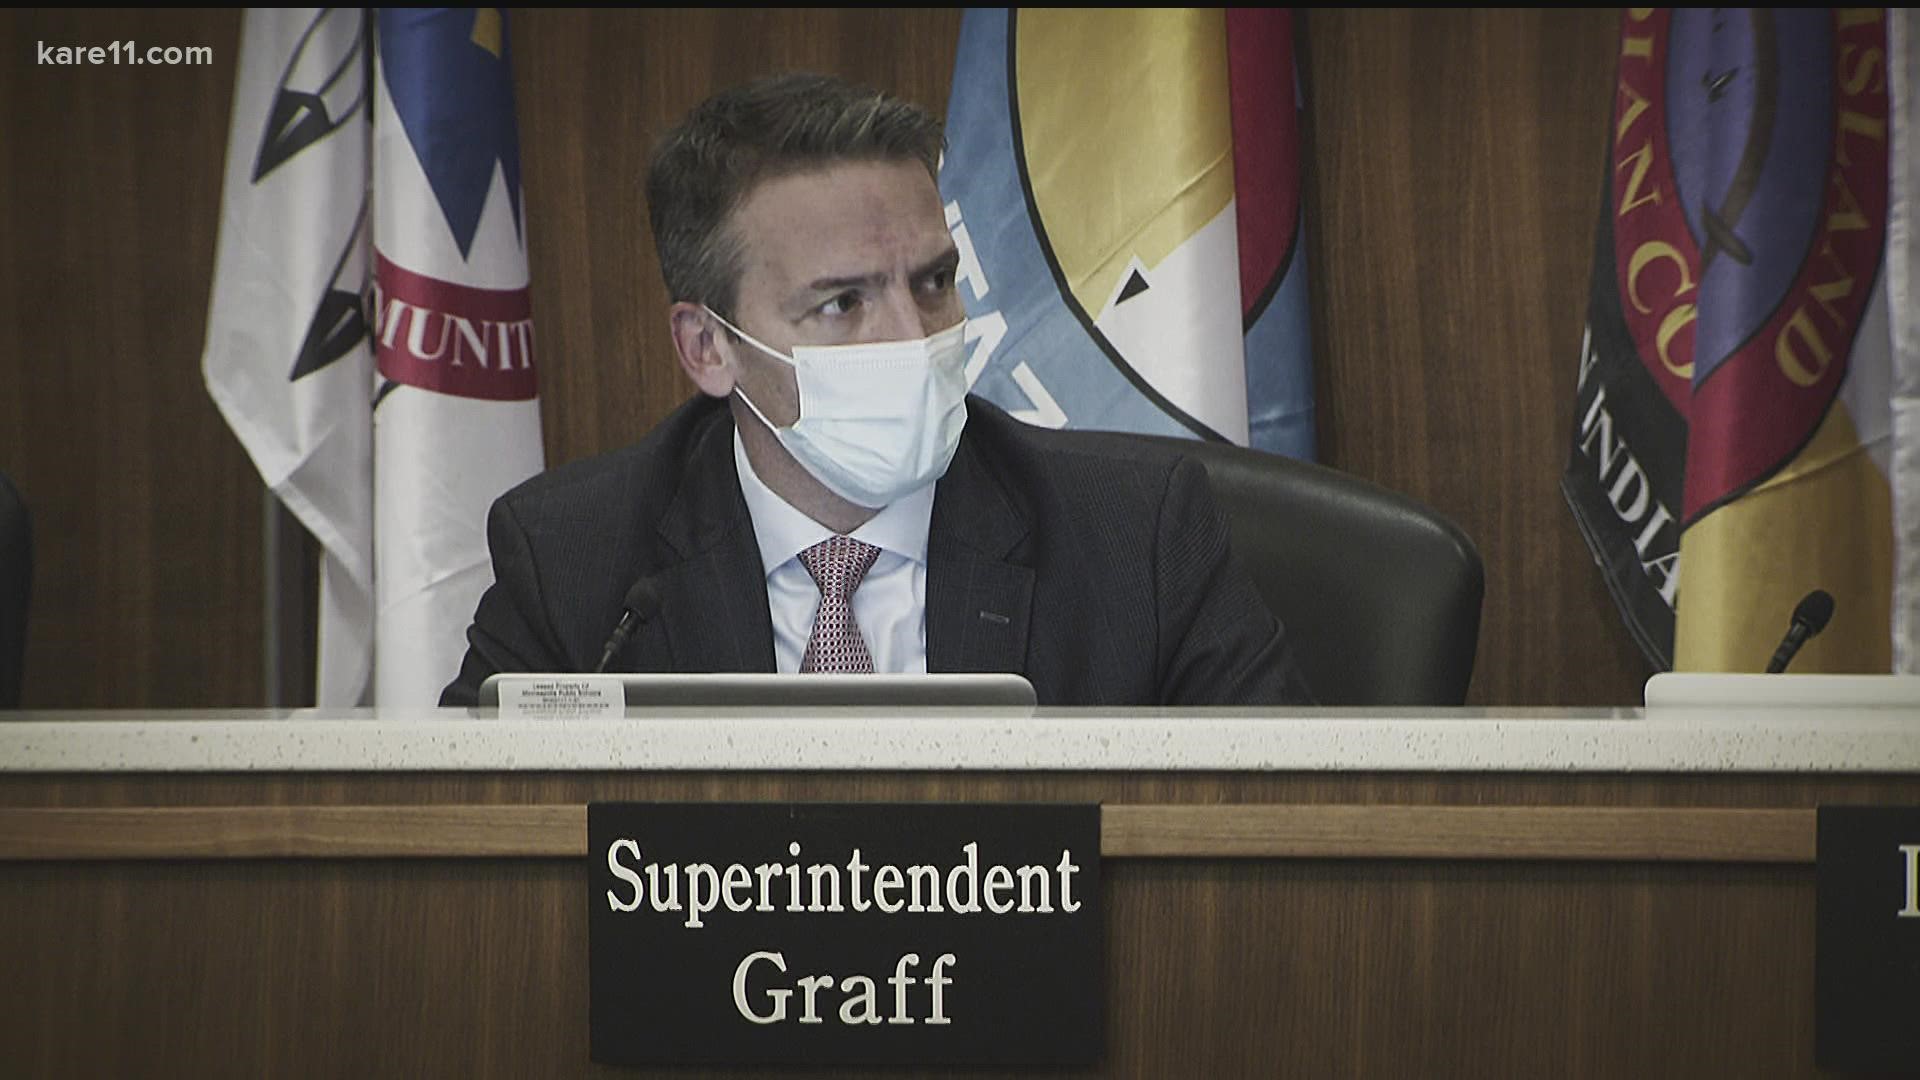 Graff announced that he will not serve a third term as superintendent, and will step down when his contract expires in June.